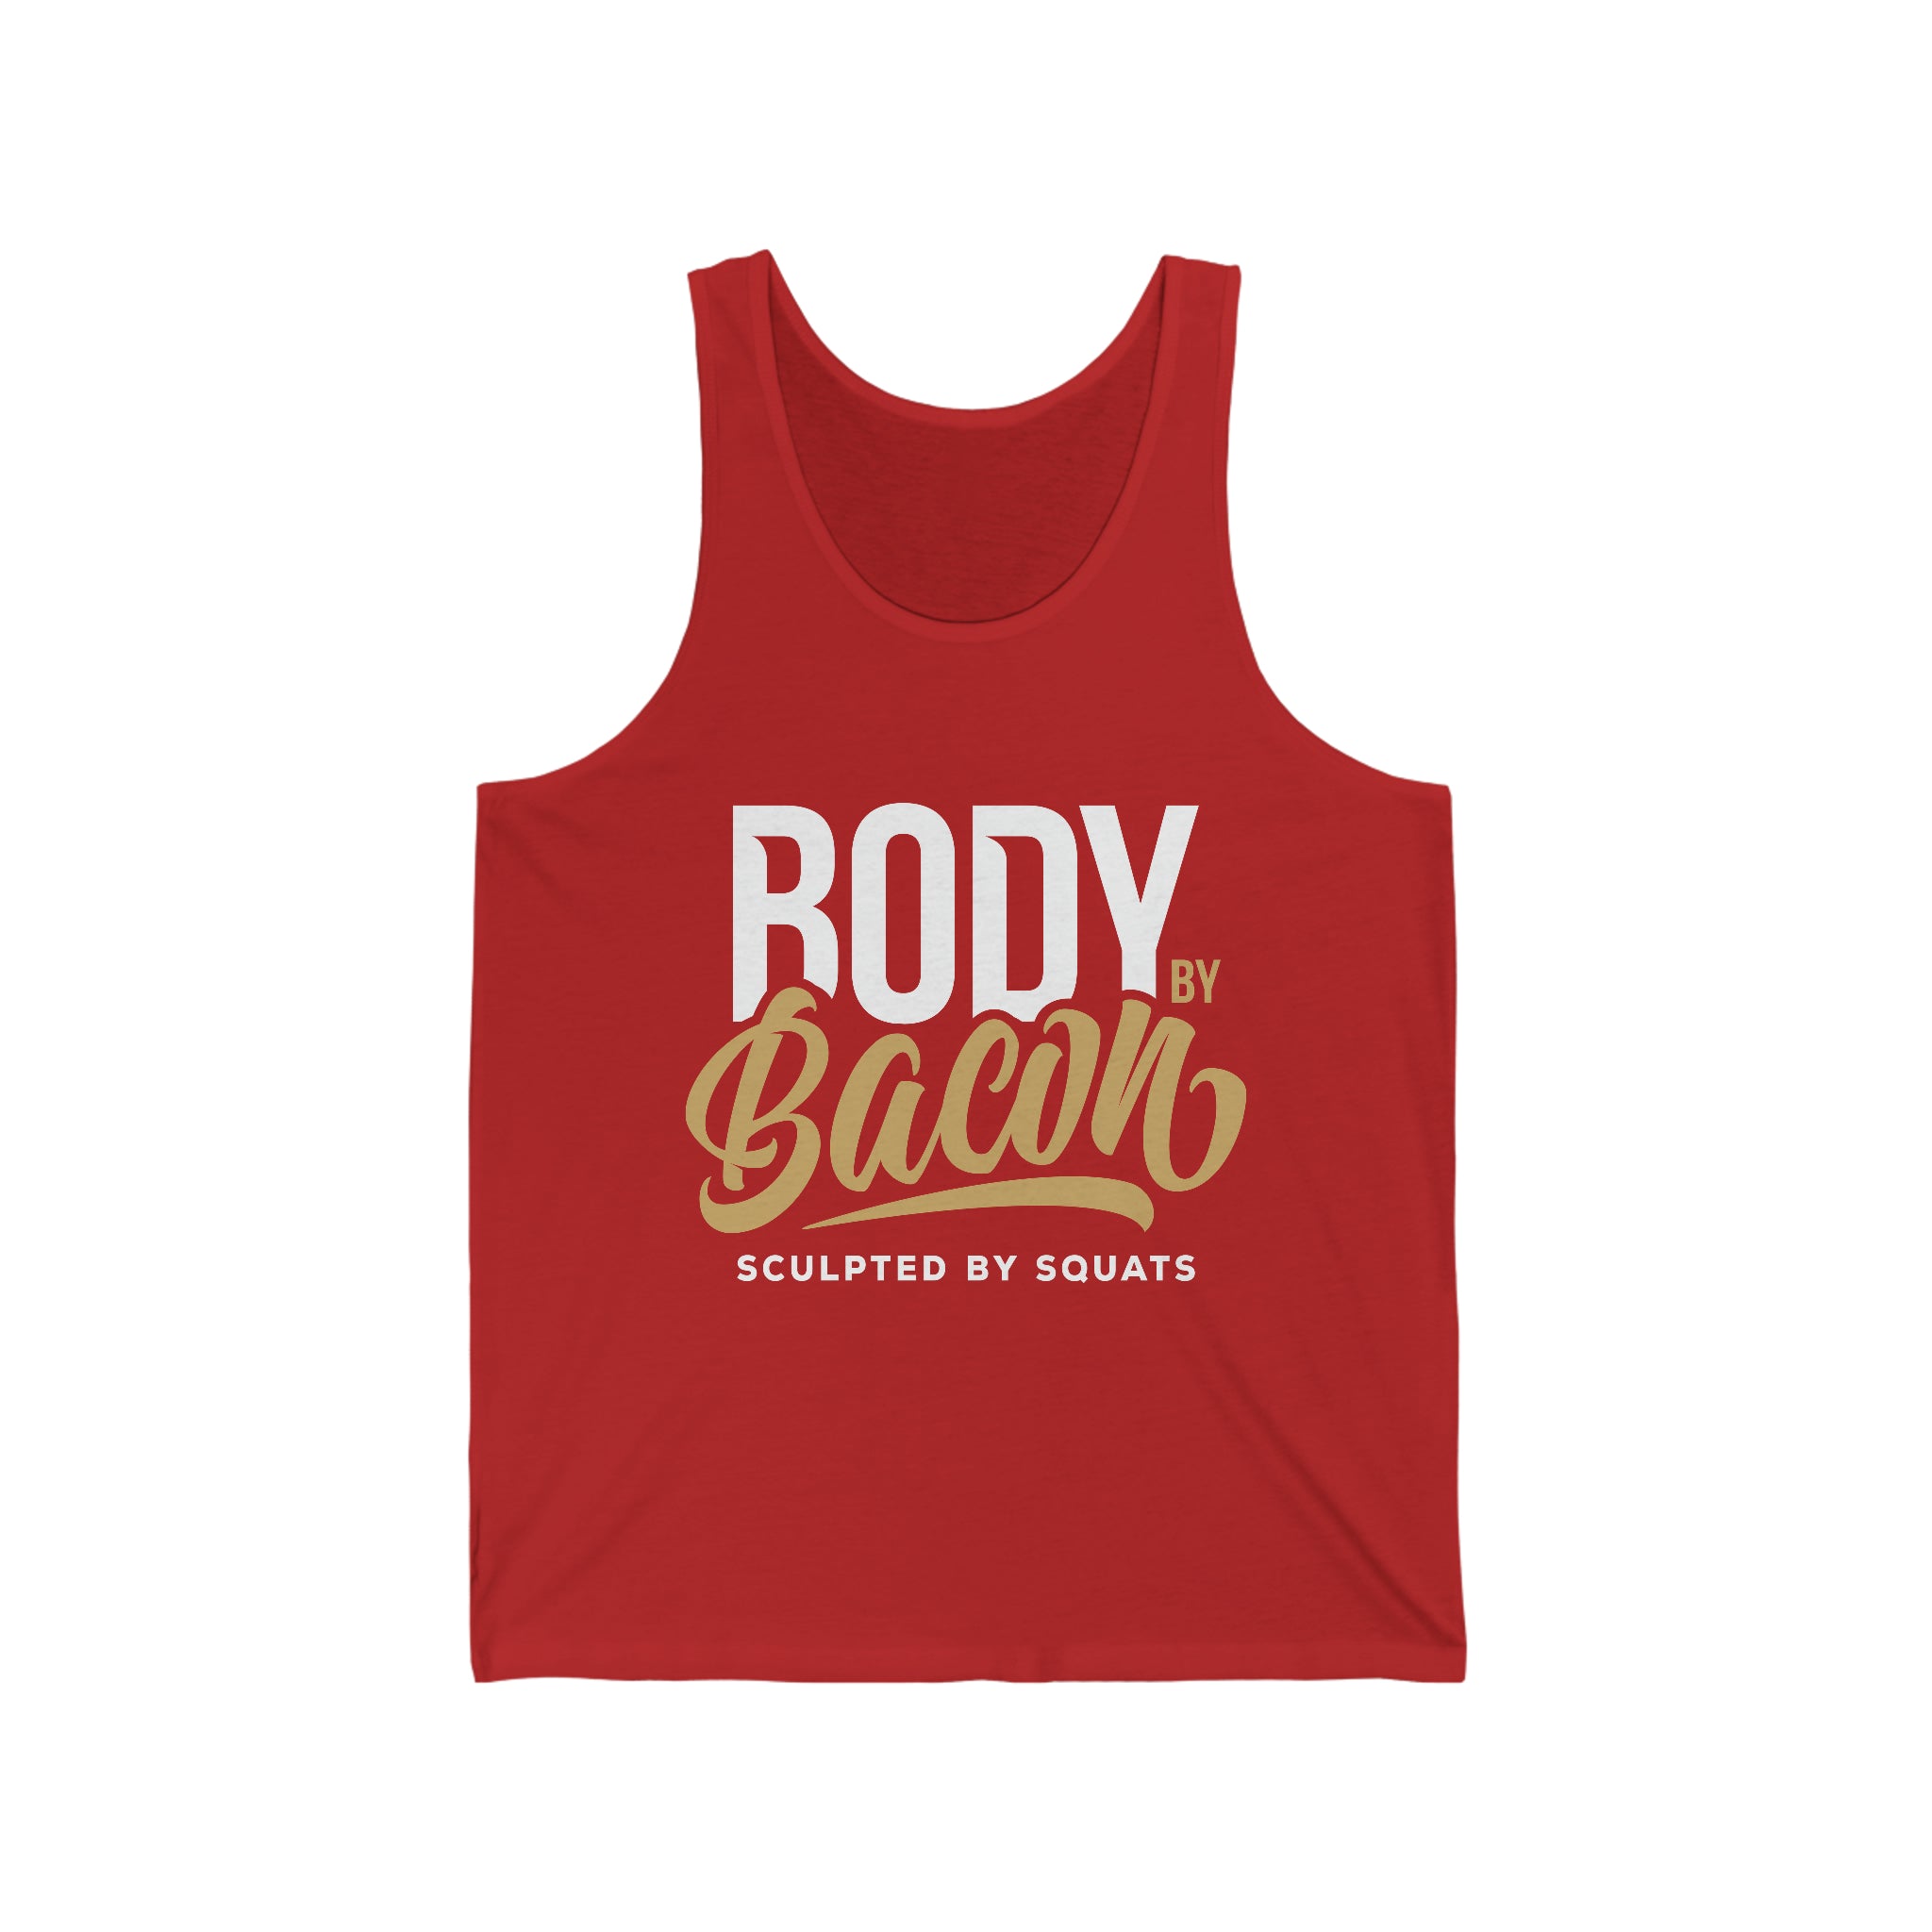 "Body by Bacon, Sculpted by Squats" Unisex Jersey Tank